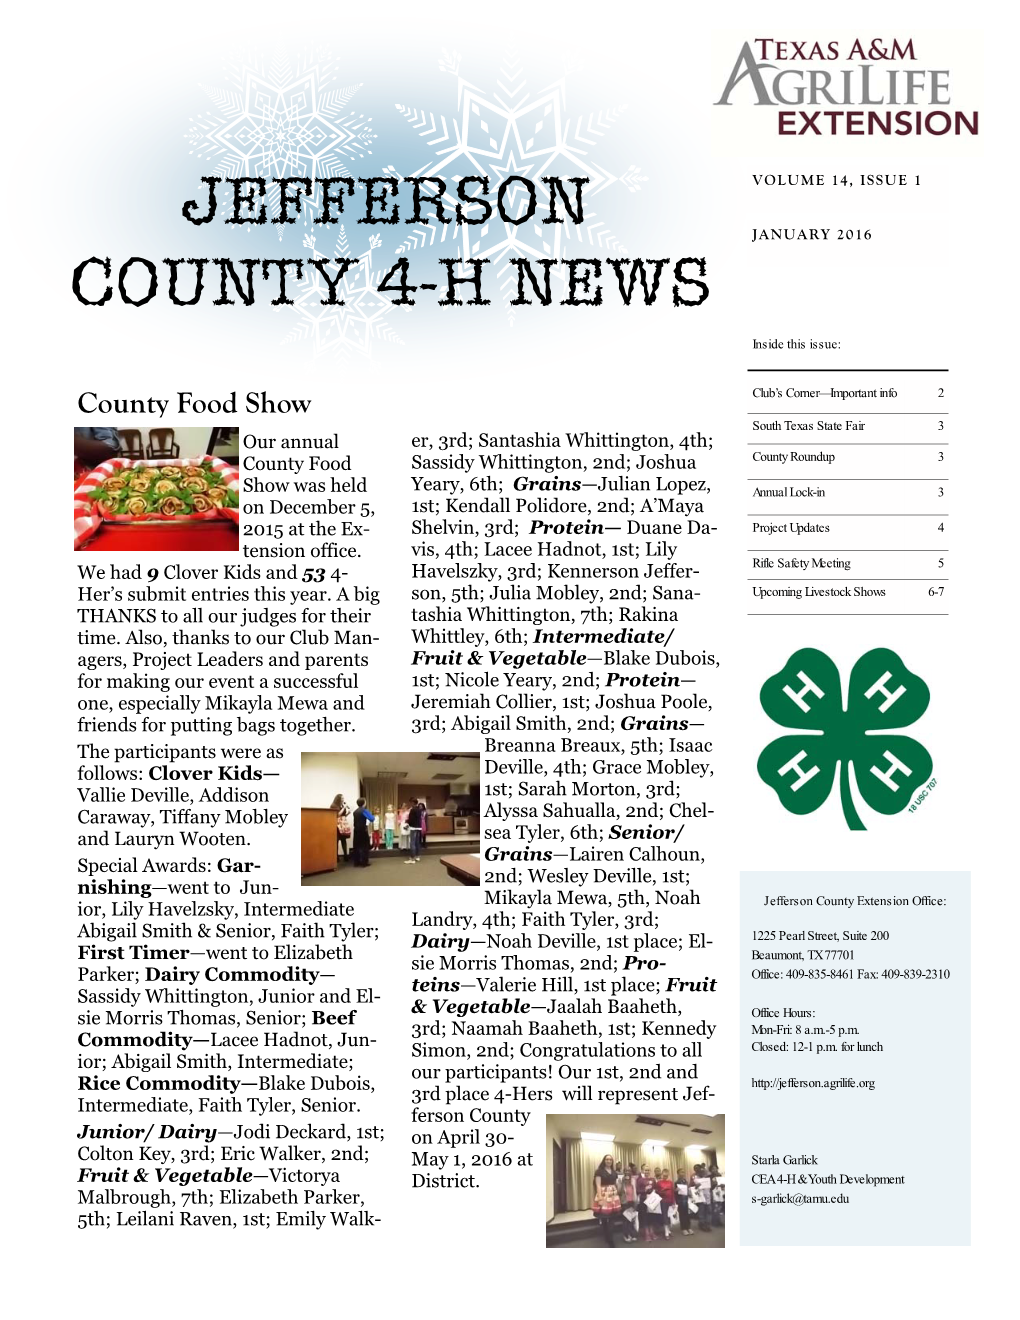 JEFFERSON COUNTY 4-H NEWS Page 3 Project Updates Vet Science—This Project Will Begin in February and Run Approxi- Mately 6 –8 Weeks